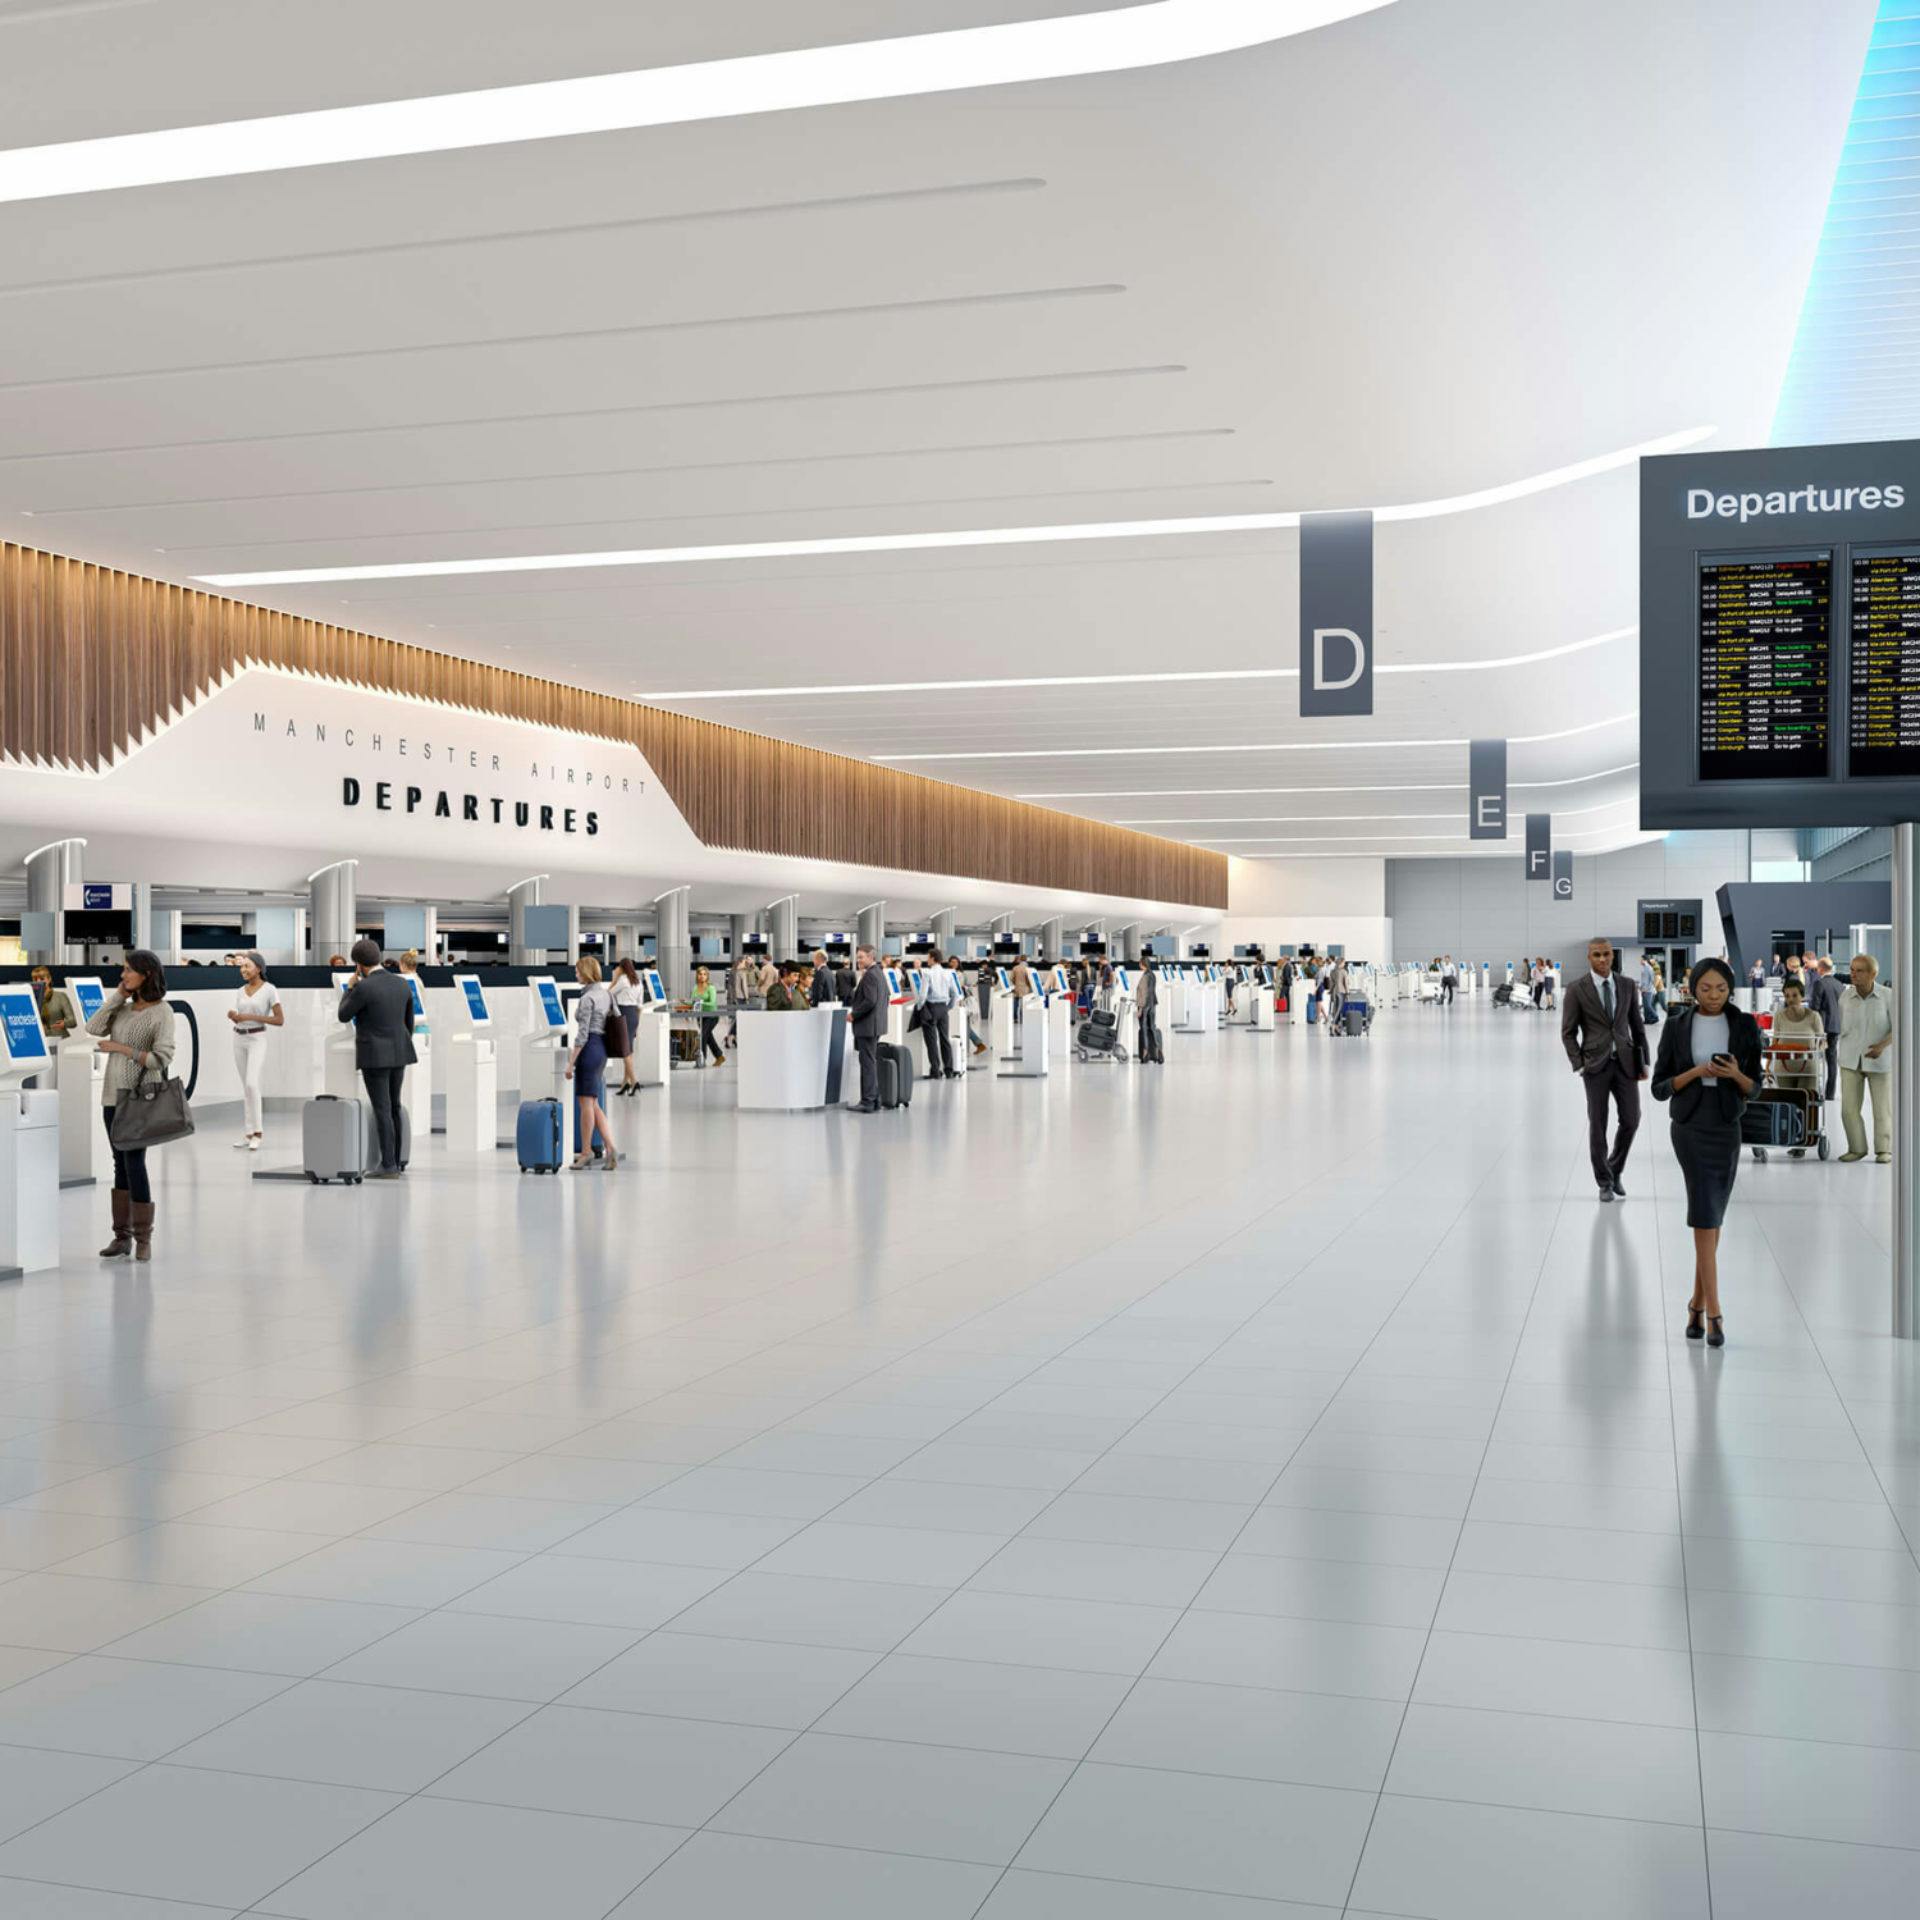 Interior image of Manchester airport departures